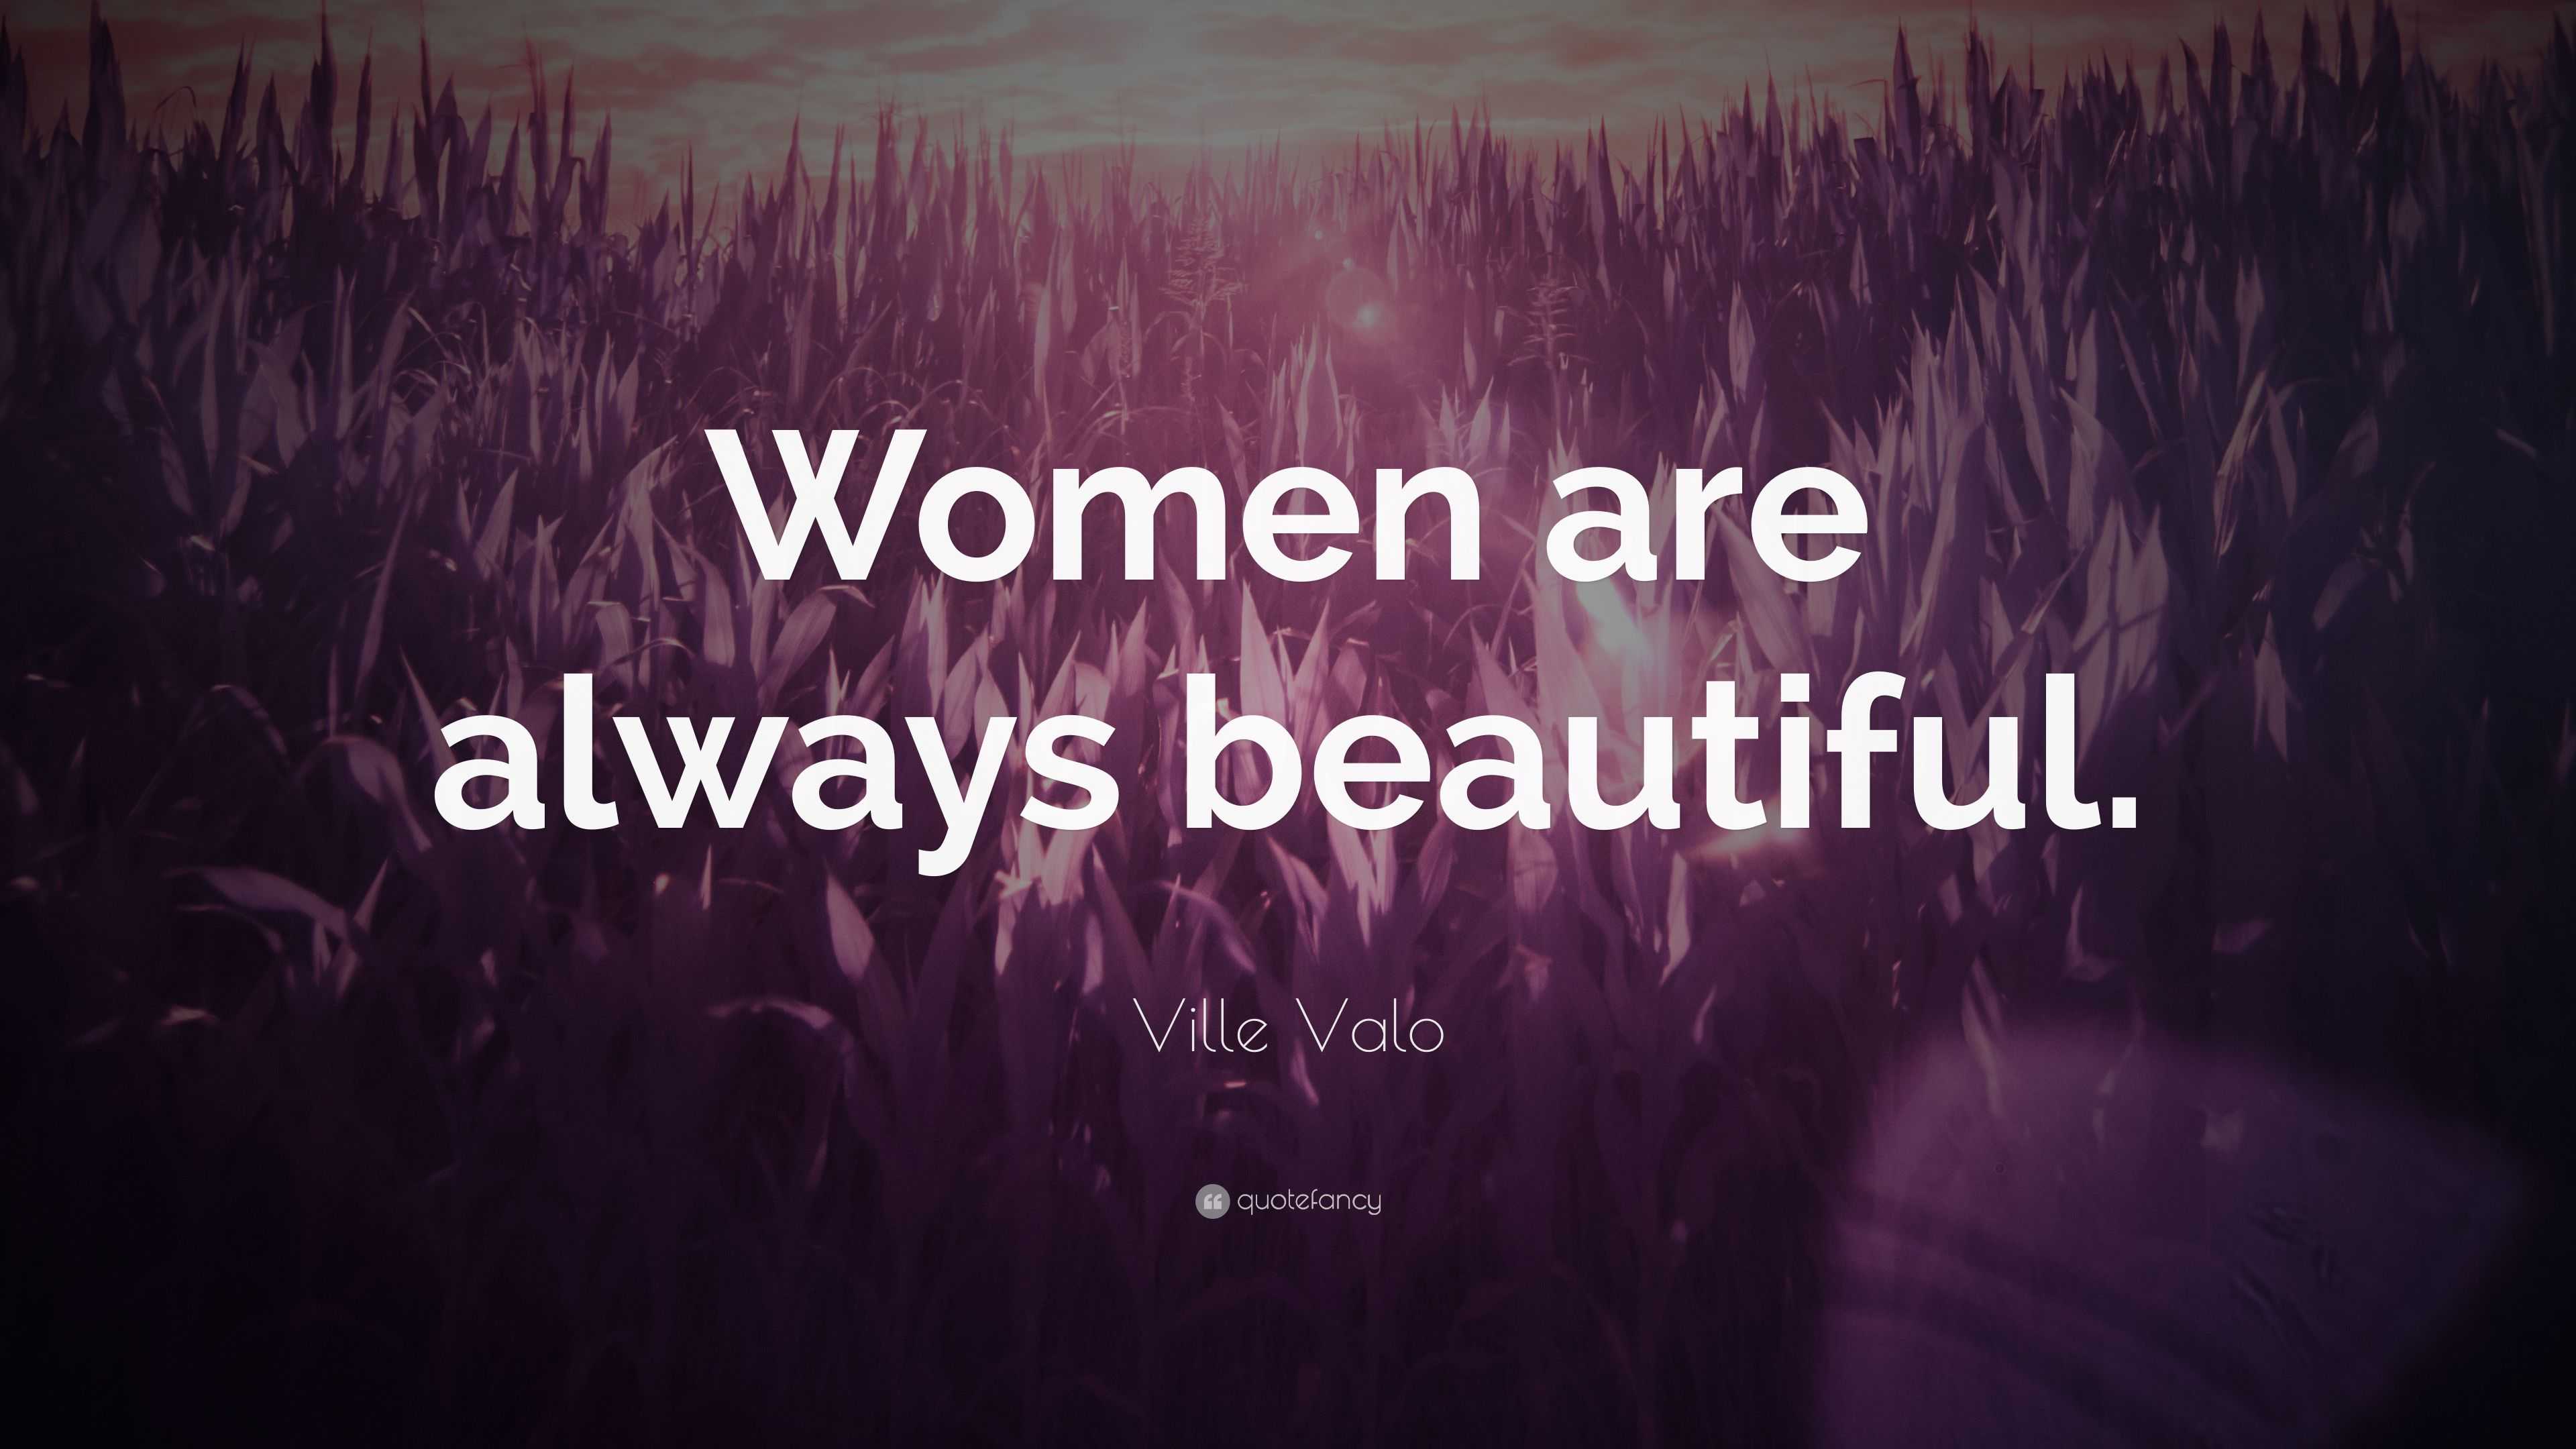 Ville Valo Quote: “Women are always beautiful.”